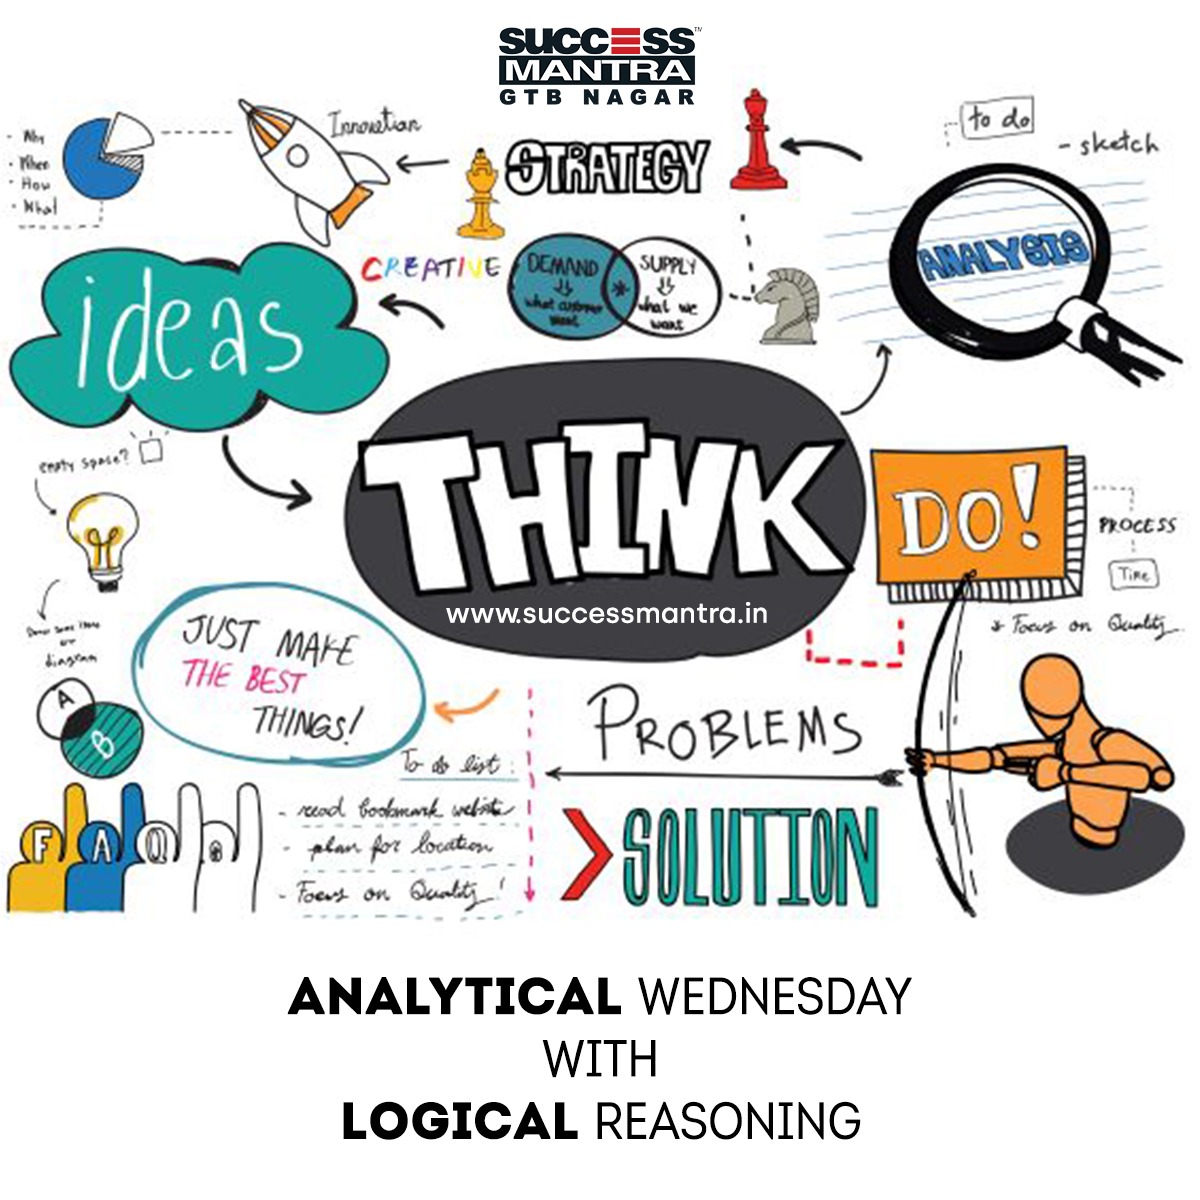 Questions on Logical Reasoning SMLRQ035